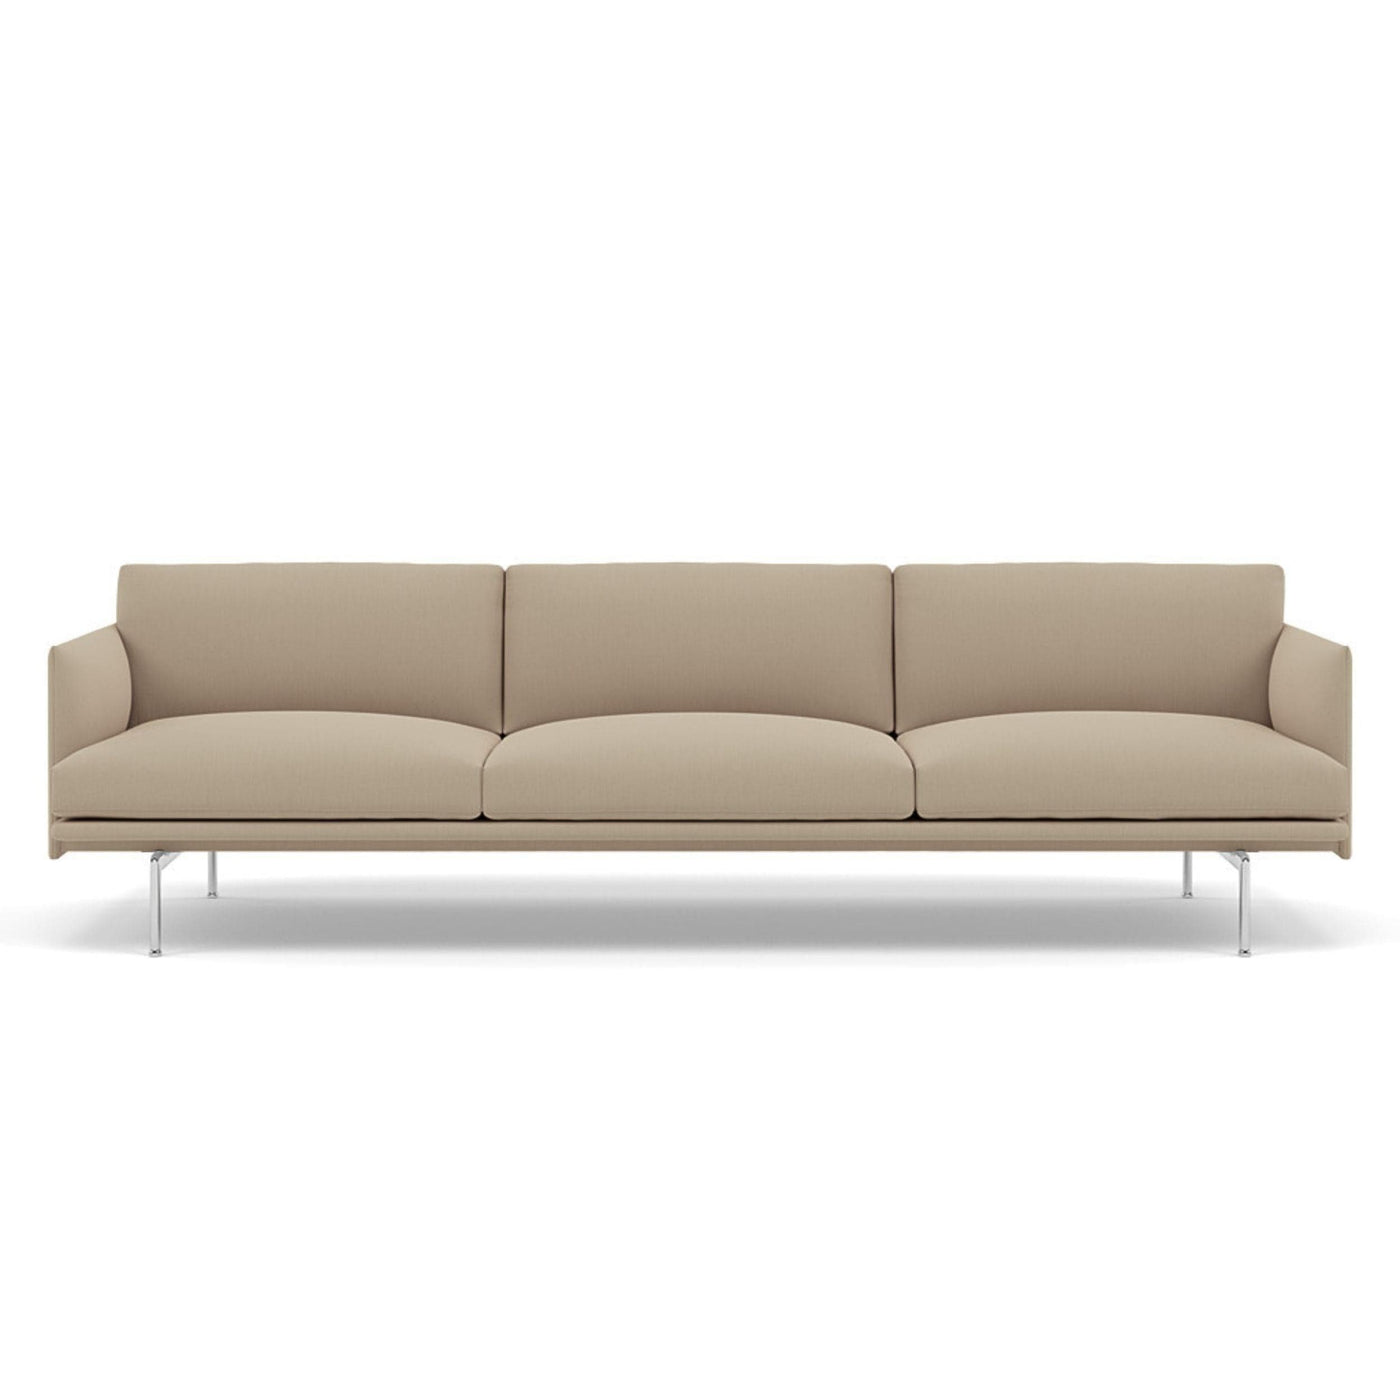 muuto outline 3.5 seater sofa in clara 248 natural fabric and polished aluminium legs. Made to order from someday designs. #colour_clara-248